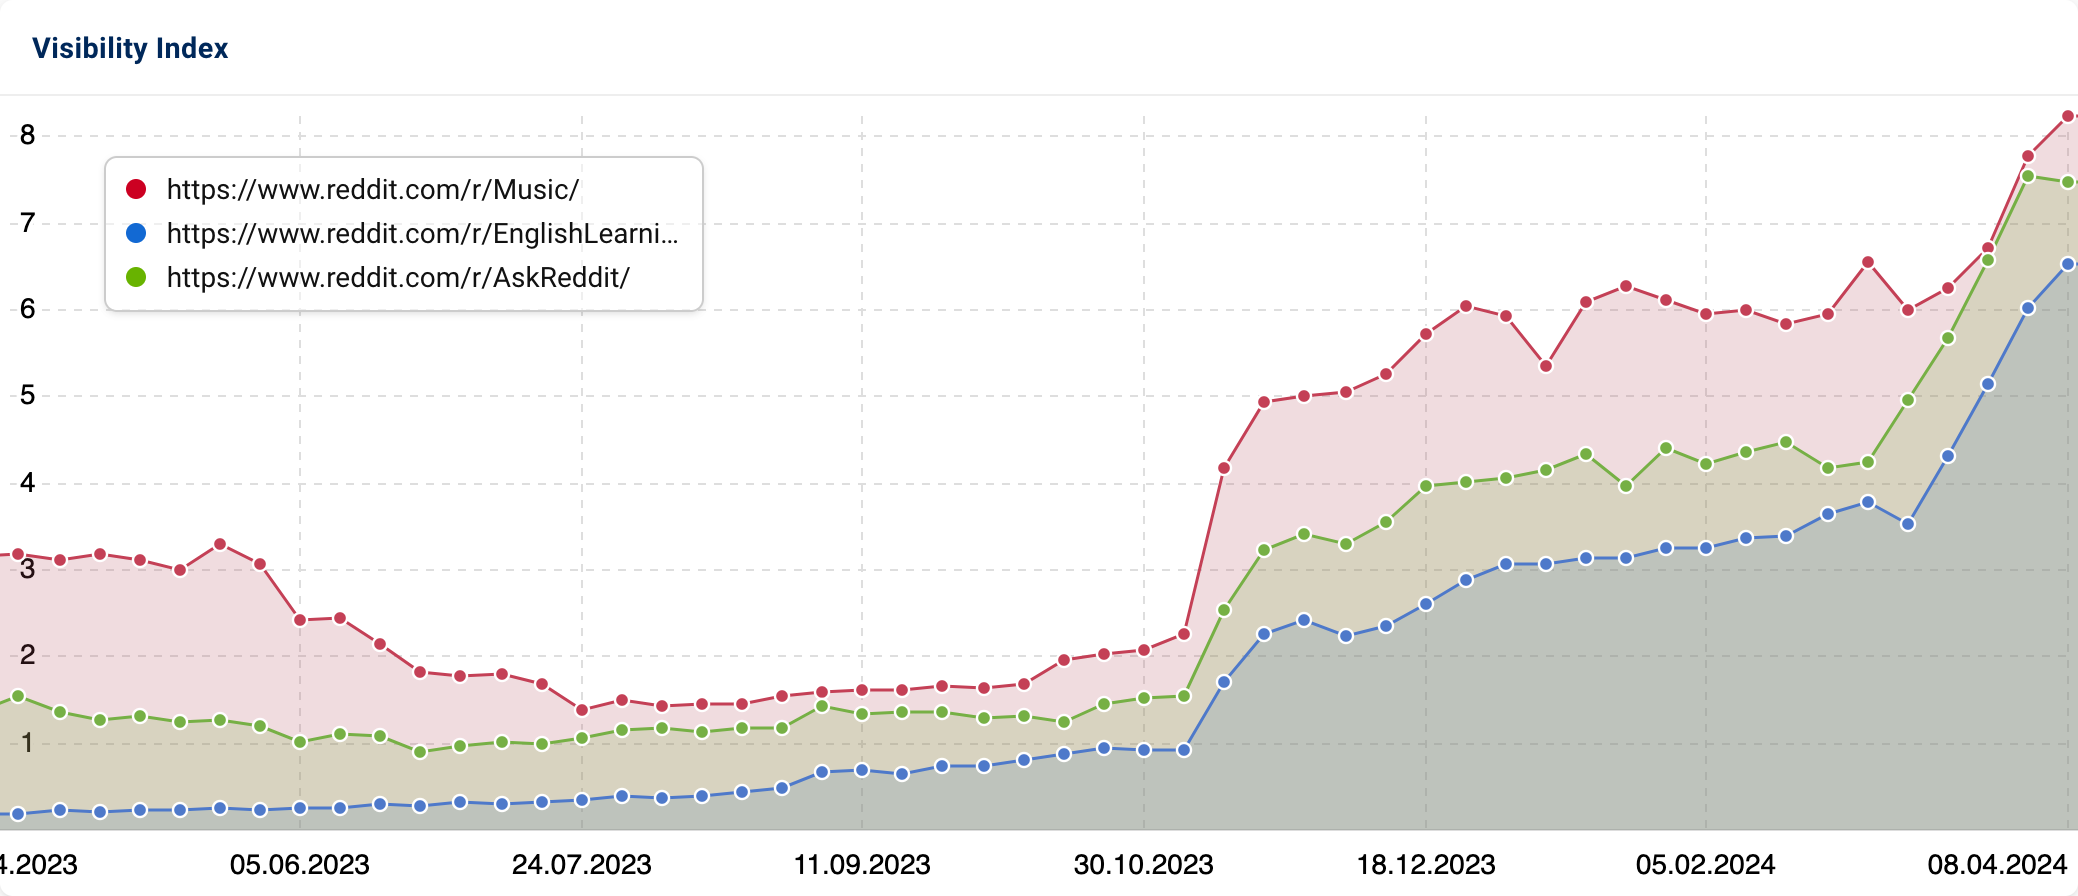 Graph with Visibility Index of three directories from "reddit.com".